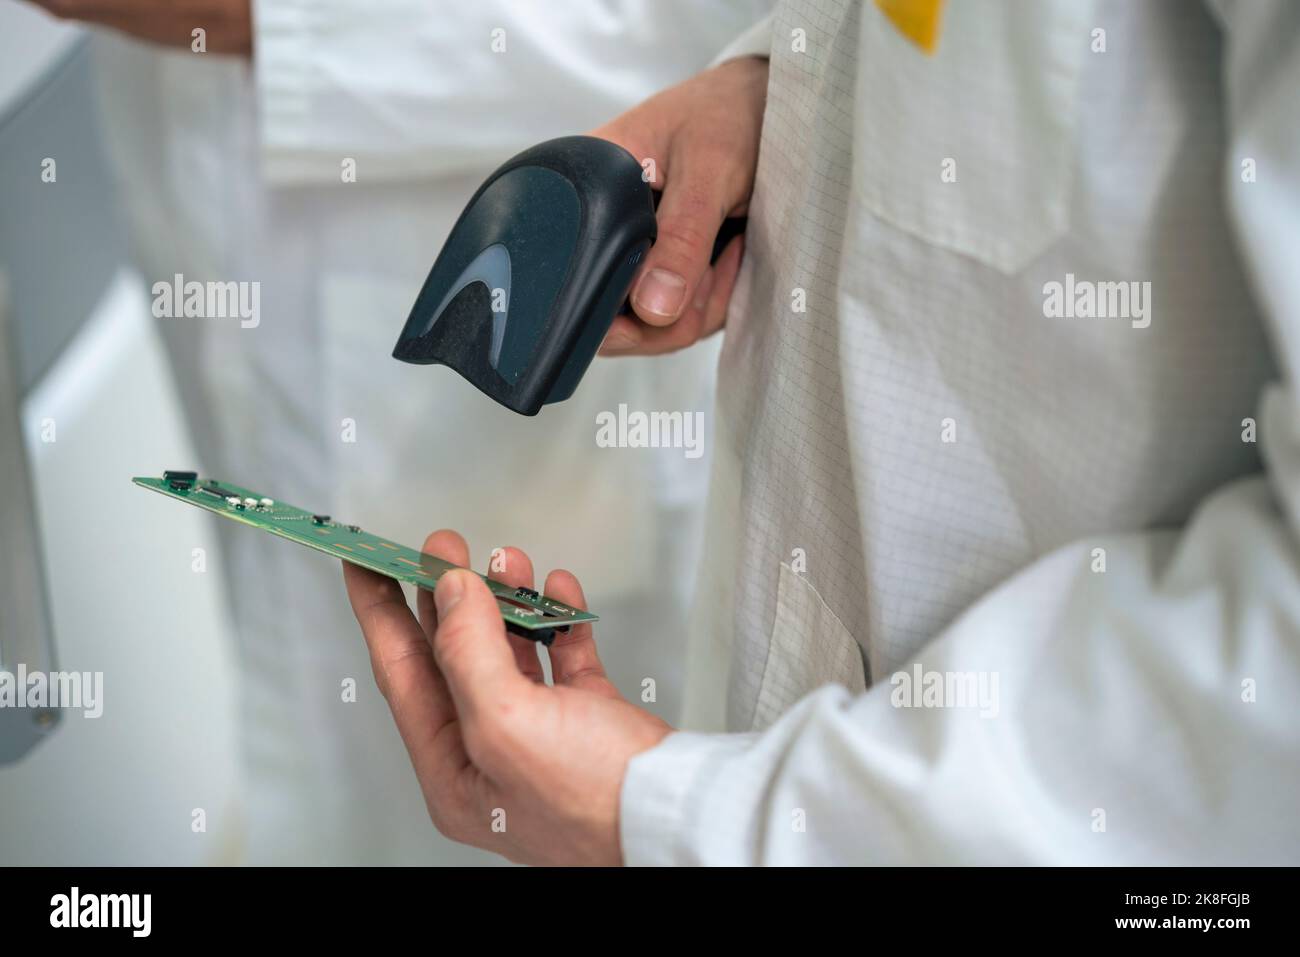 Engineer scanning circuit board with bar code scanner Stock Photo